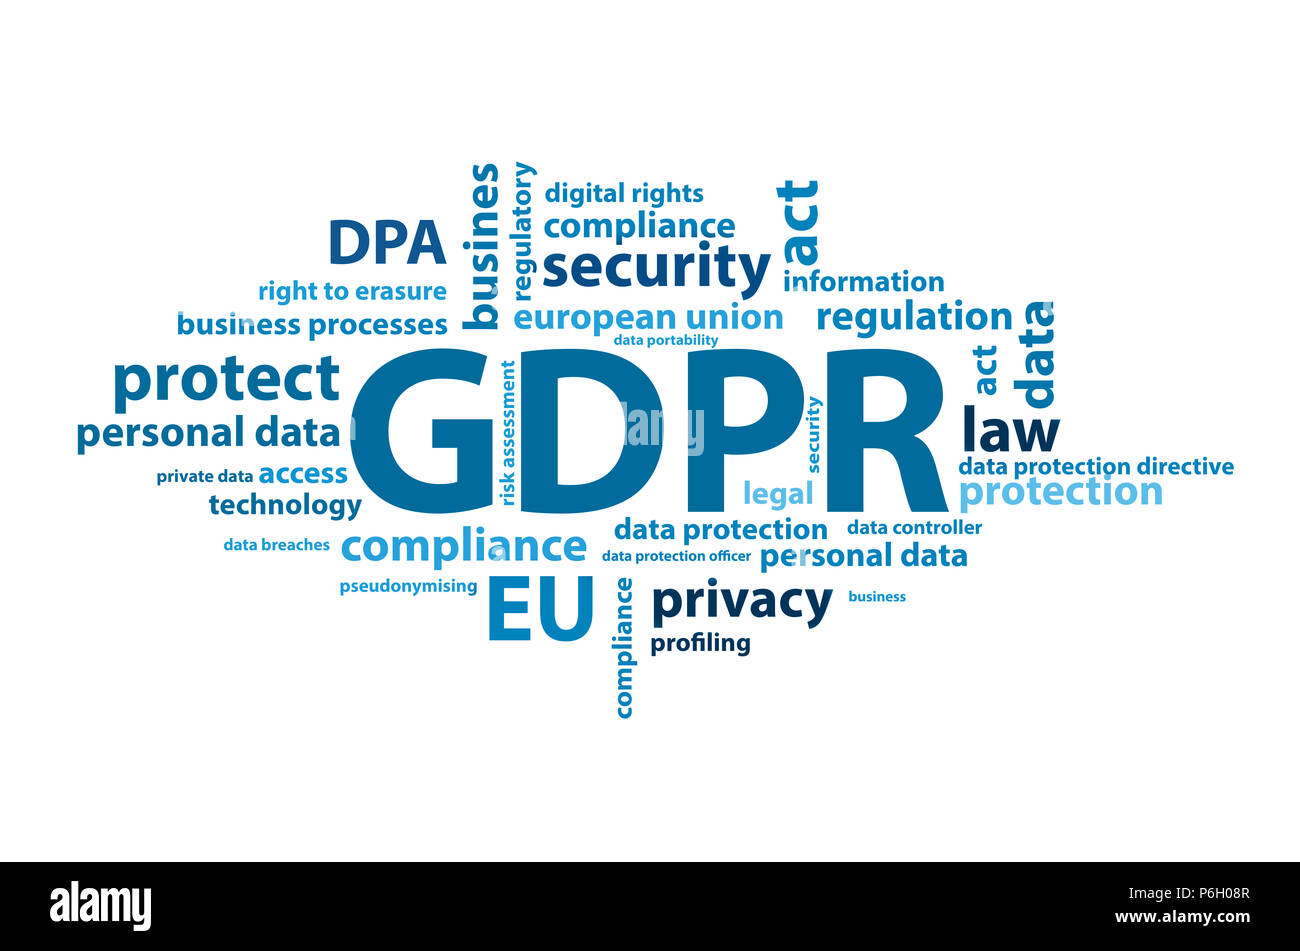 Gdpr Eu And Space Law Gdpr An Introduction Digital Media Society And Culture